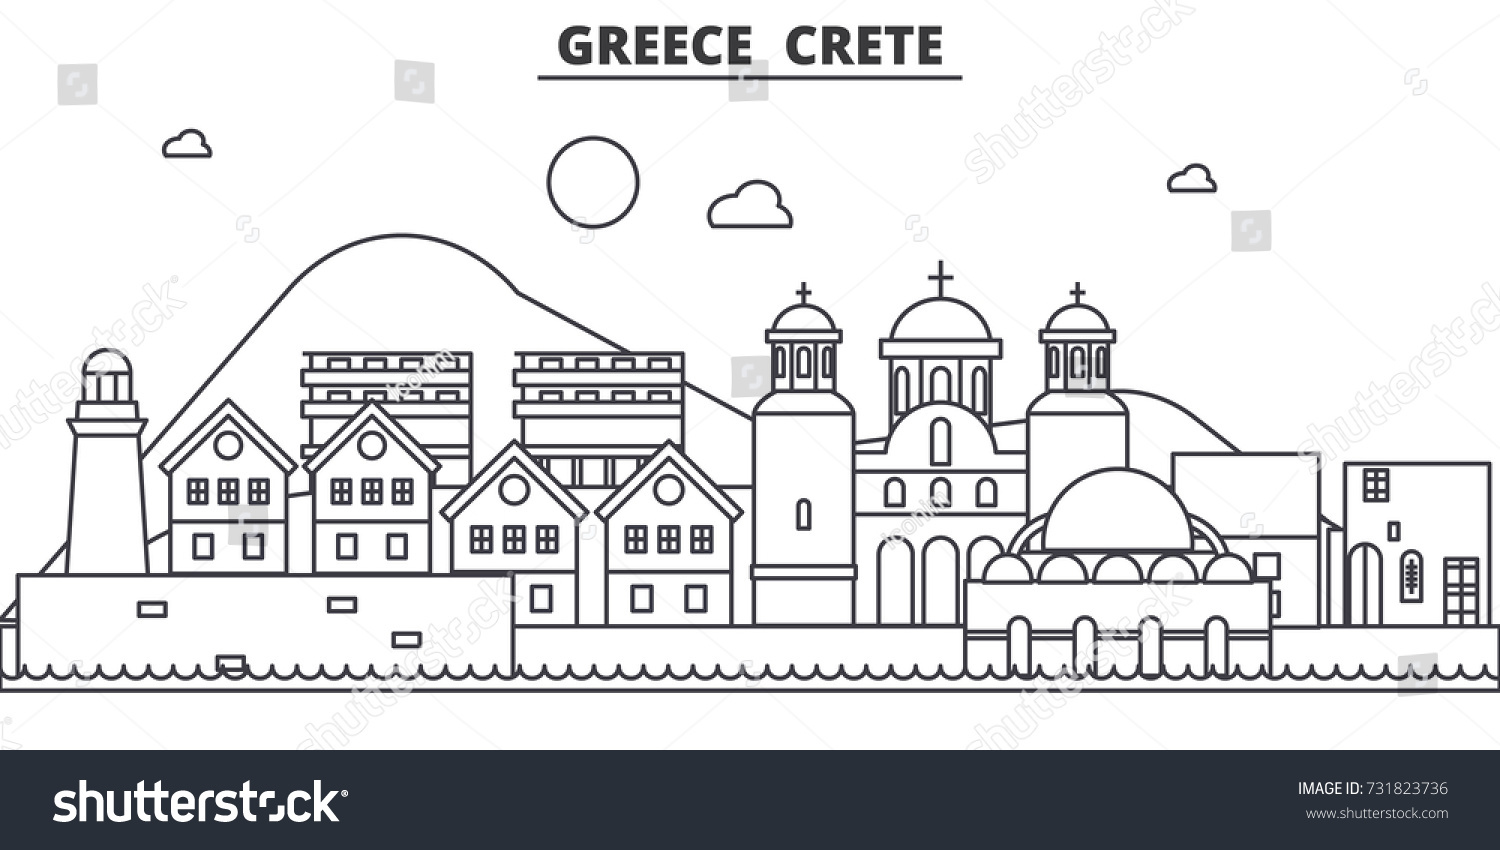 SVG of Greece, Crete architecture line skyline illustration. Linear vector cityscape with famous landmarks, city sights, design icons. Landscape wtih editable strokes svg